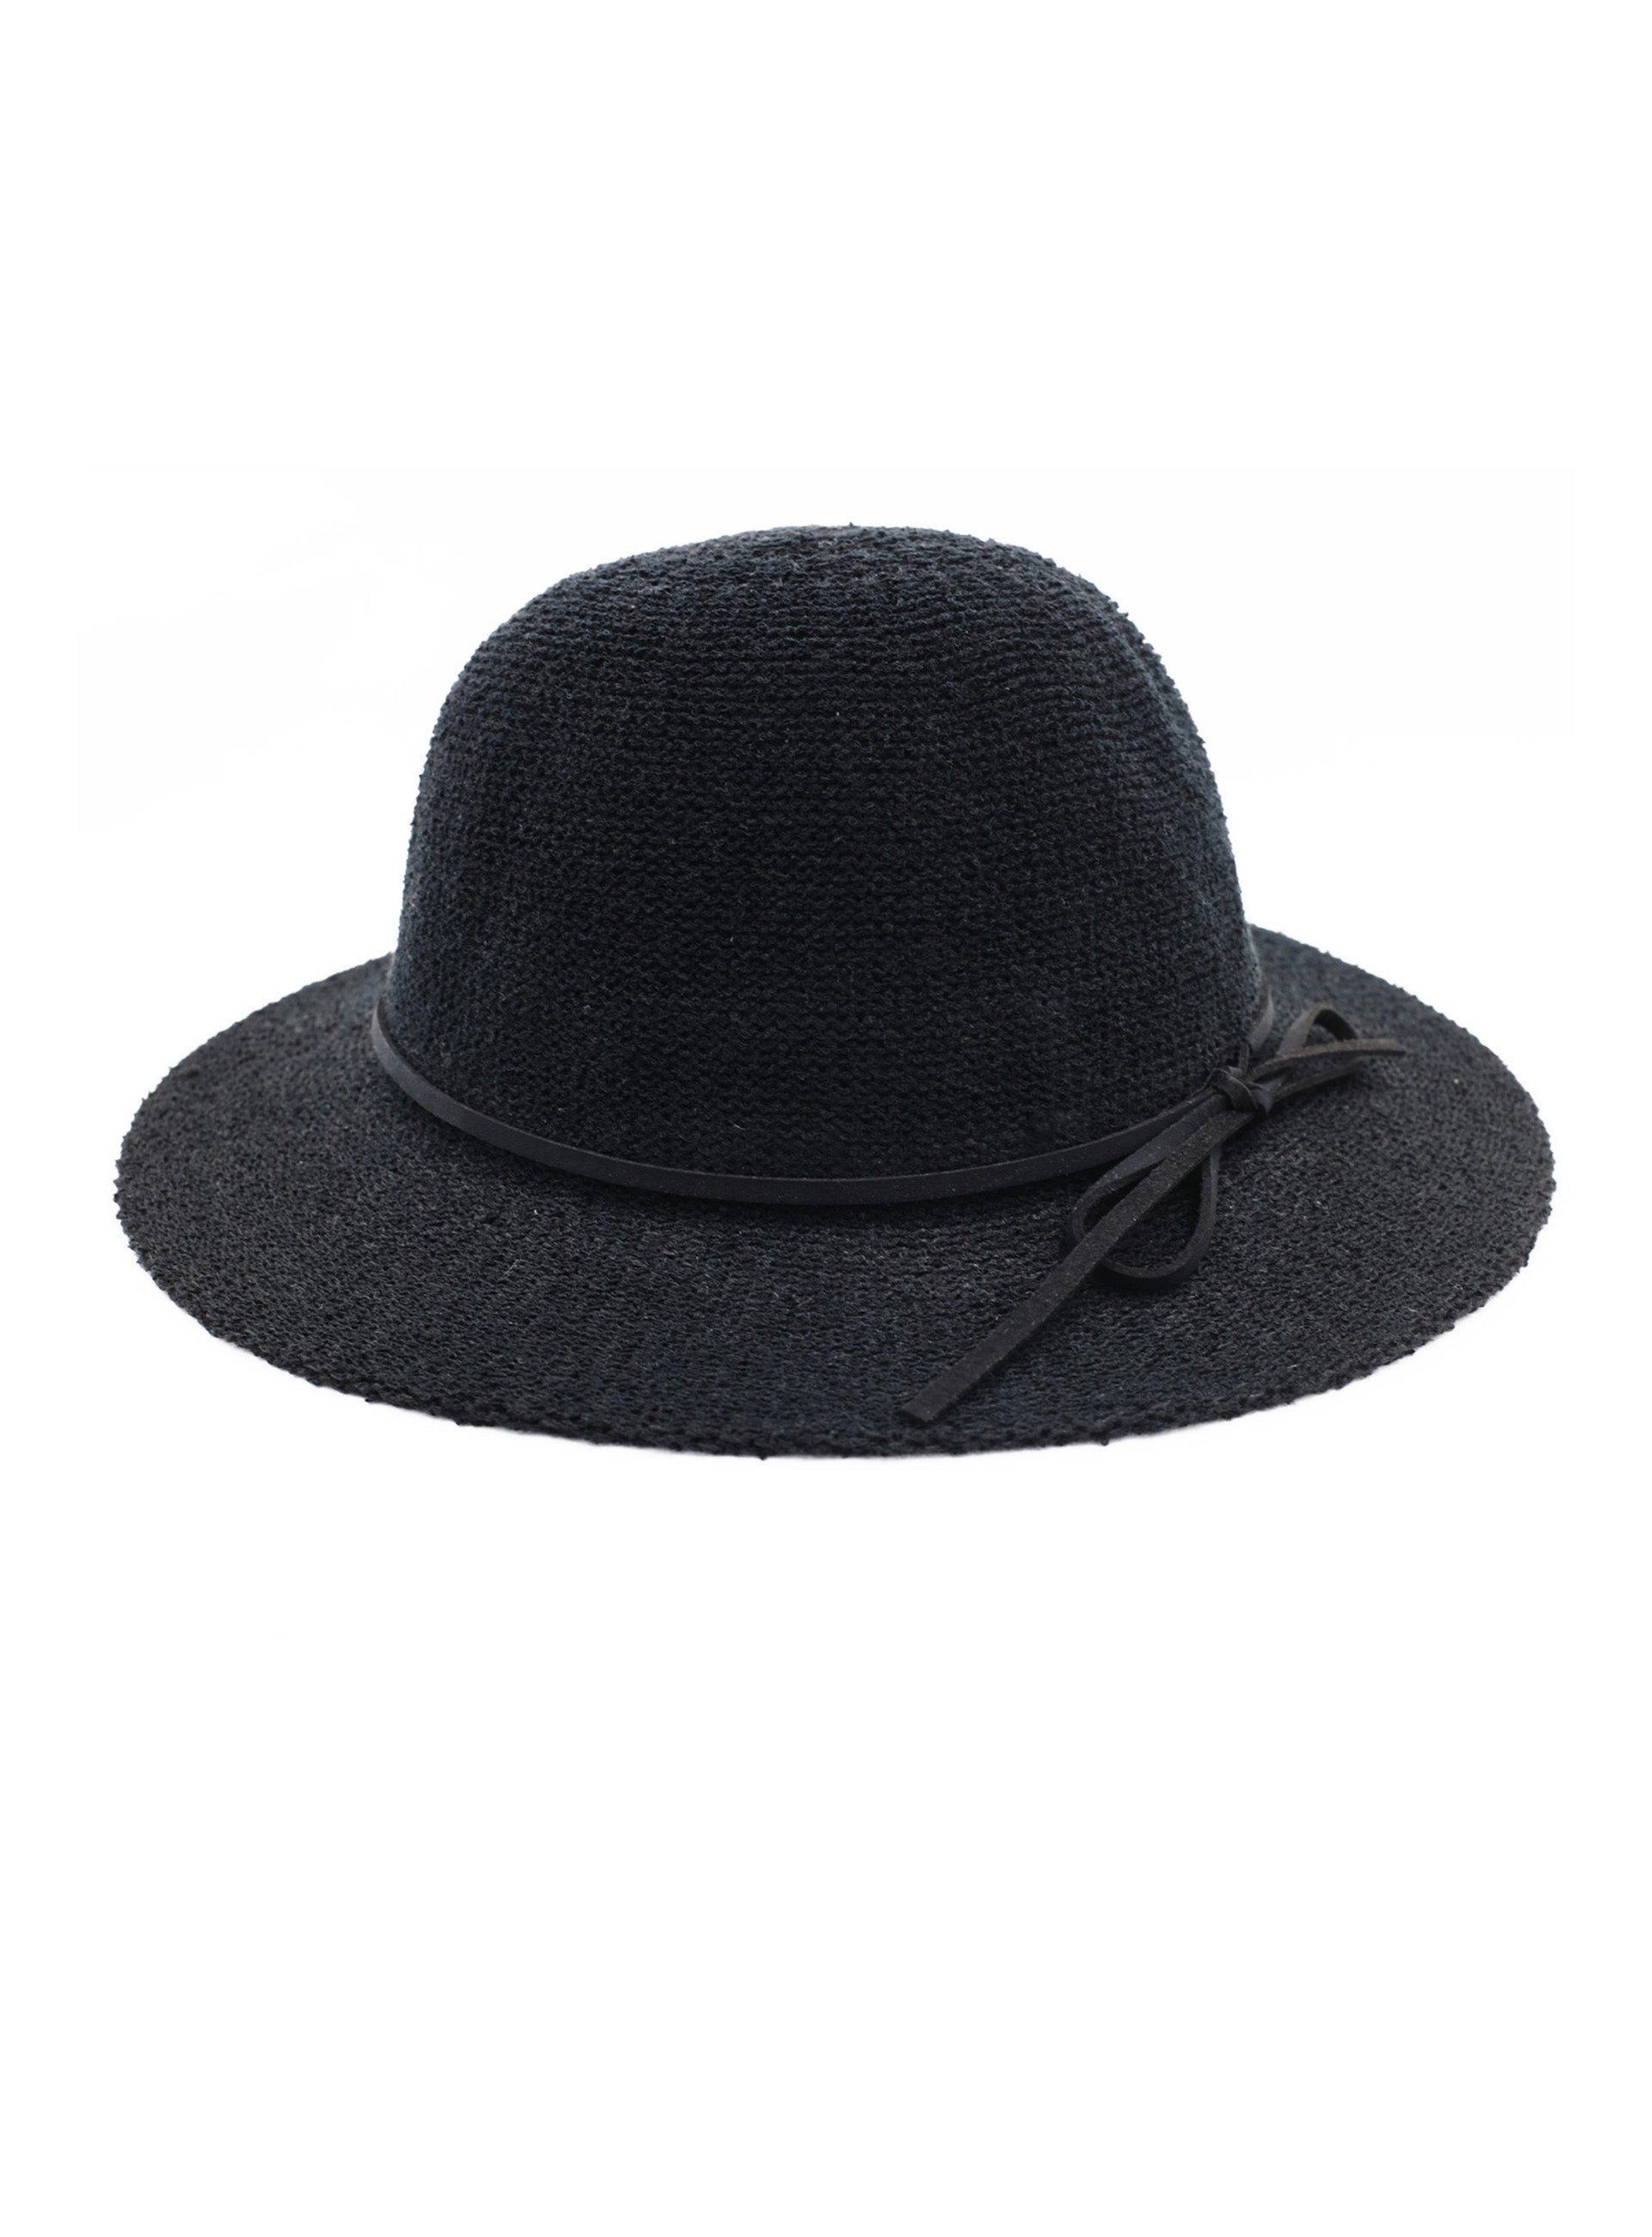 opaque black floppy hat with bow